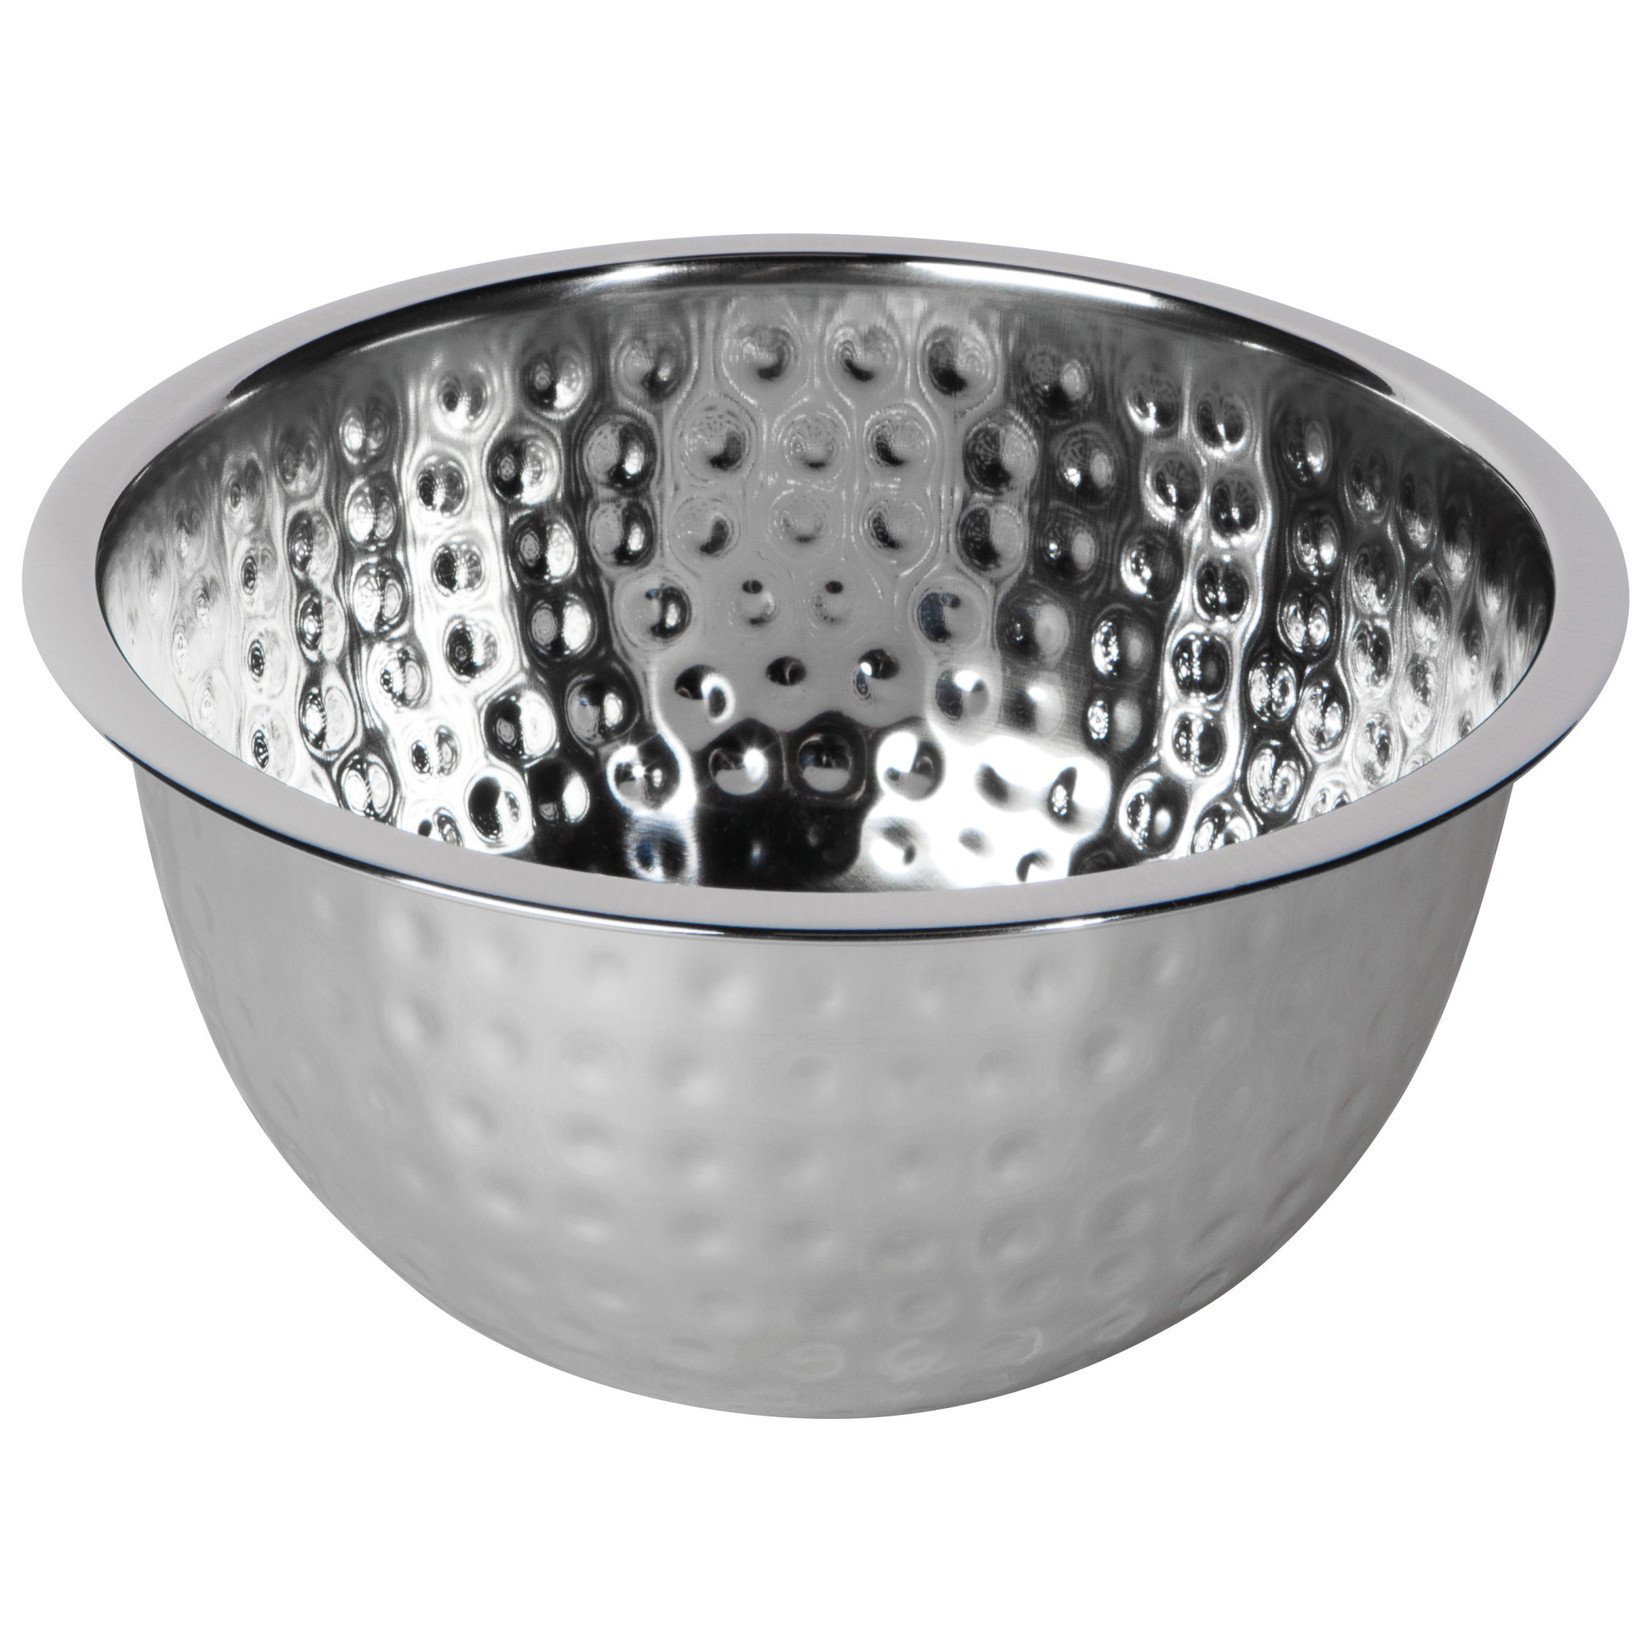 Danica Heirloom - Steel Mixing Bowl - Castles and Cottages & Ciao Bella ...